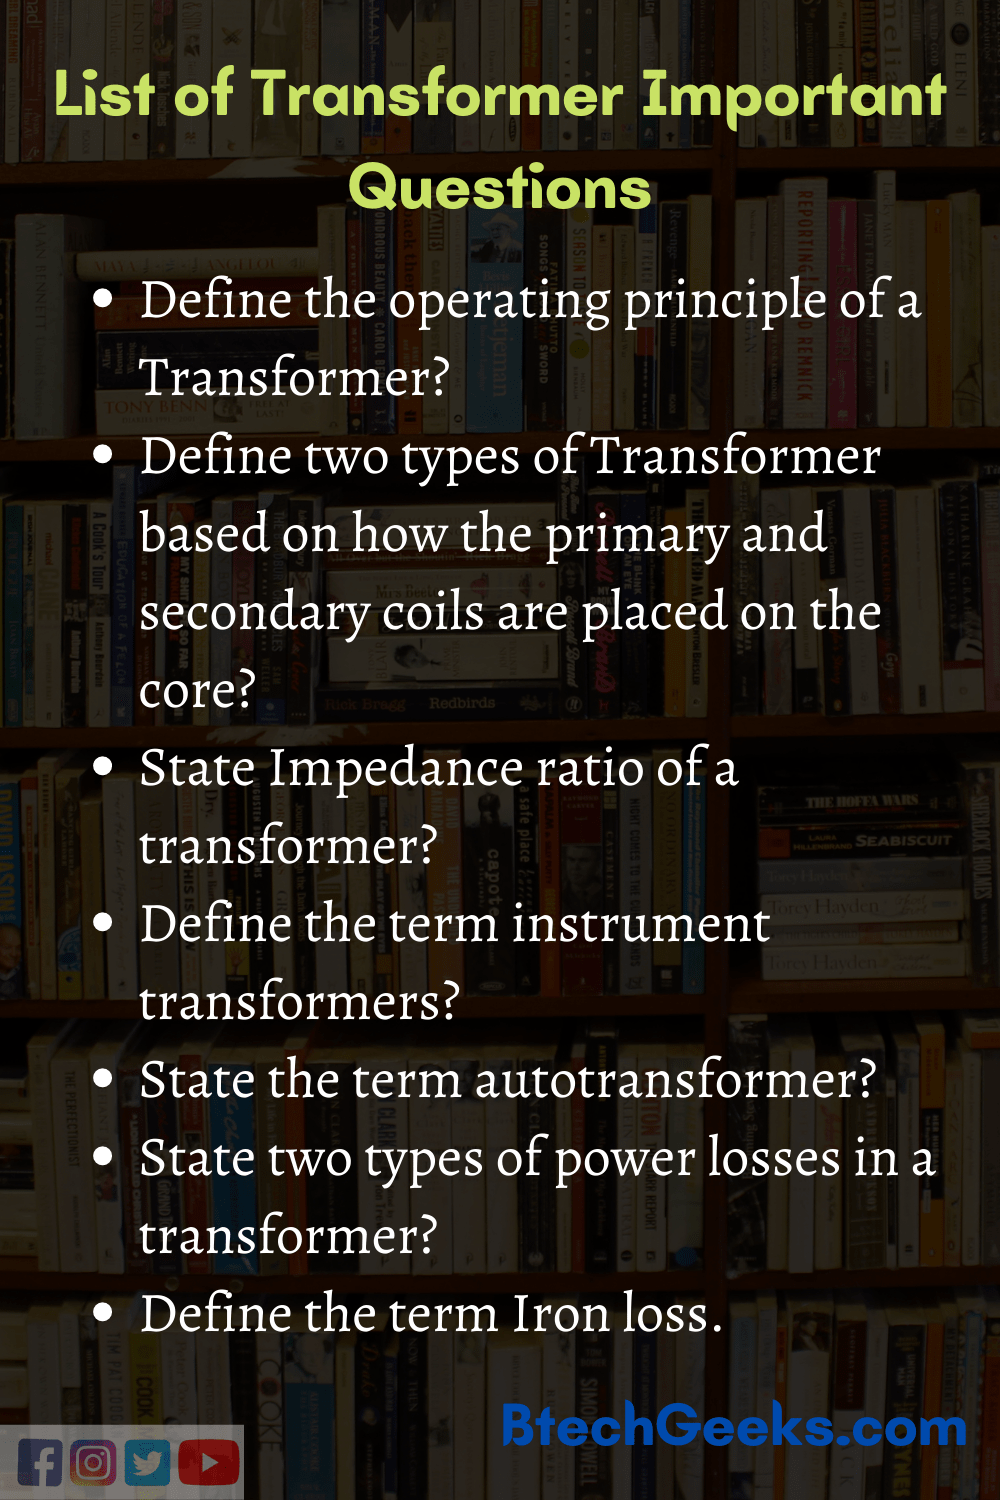 List of Transformer Important Questions